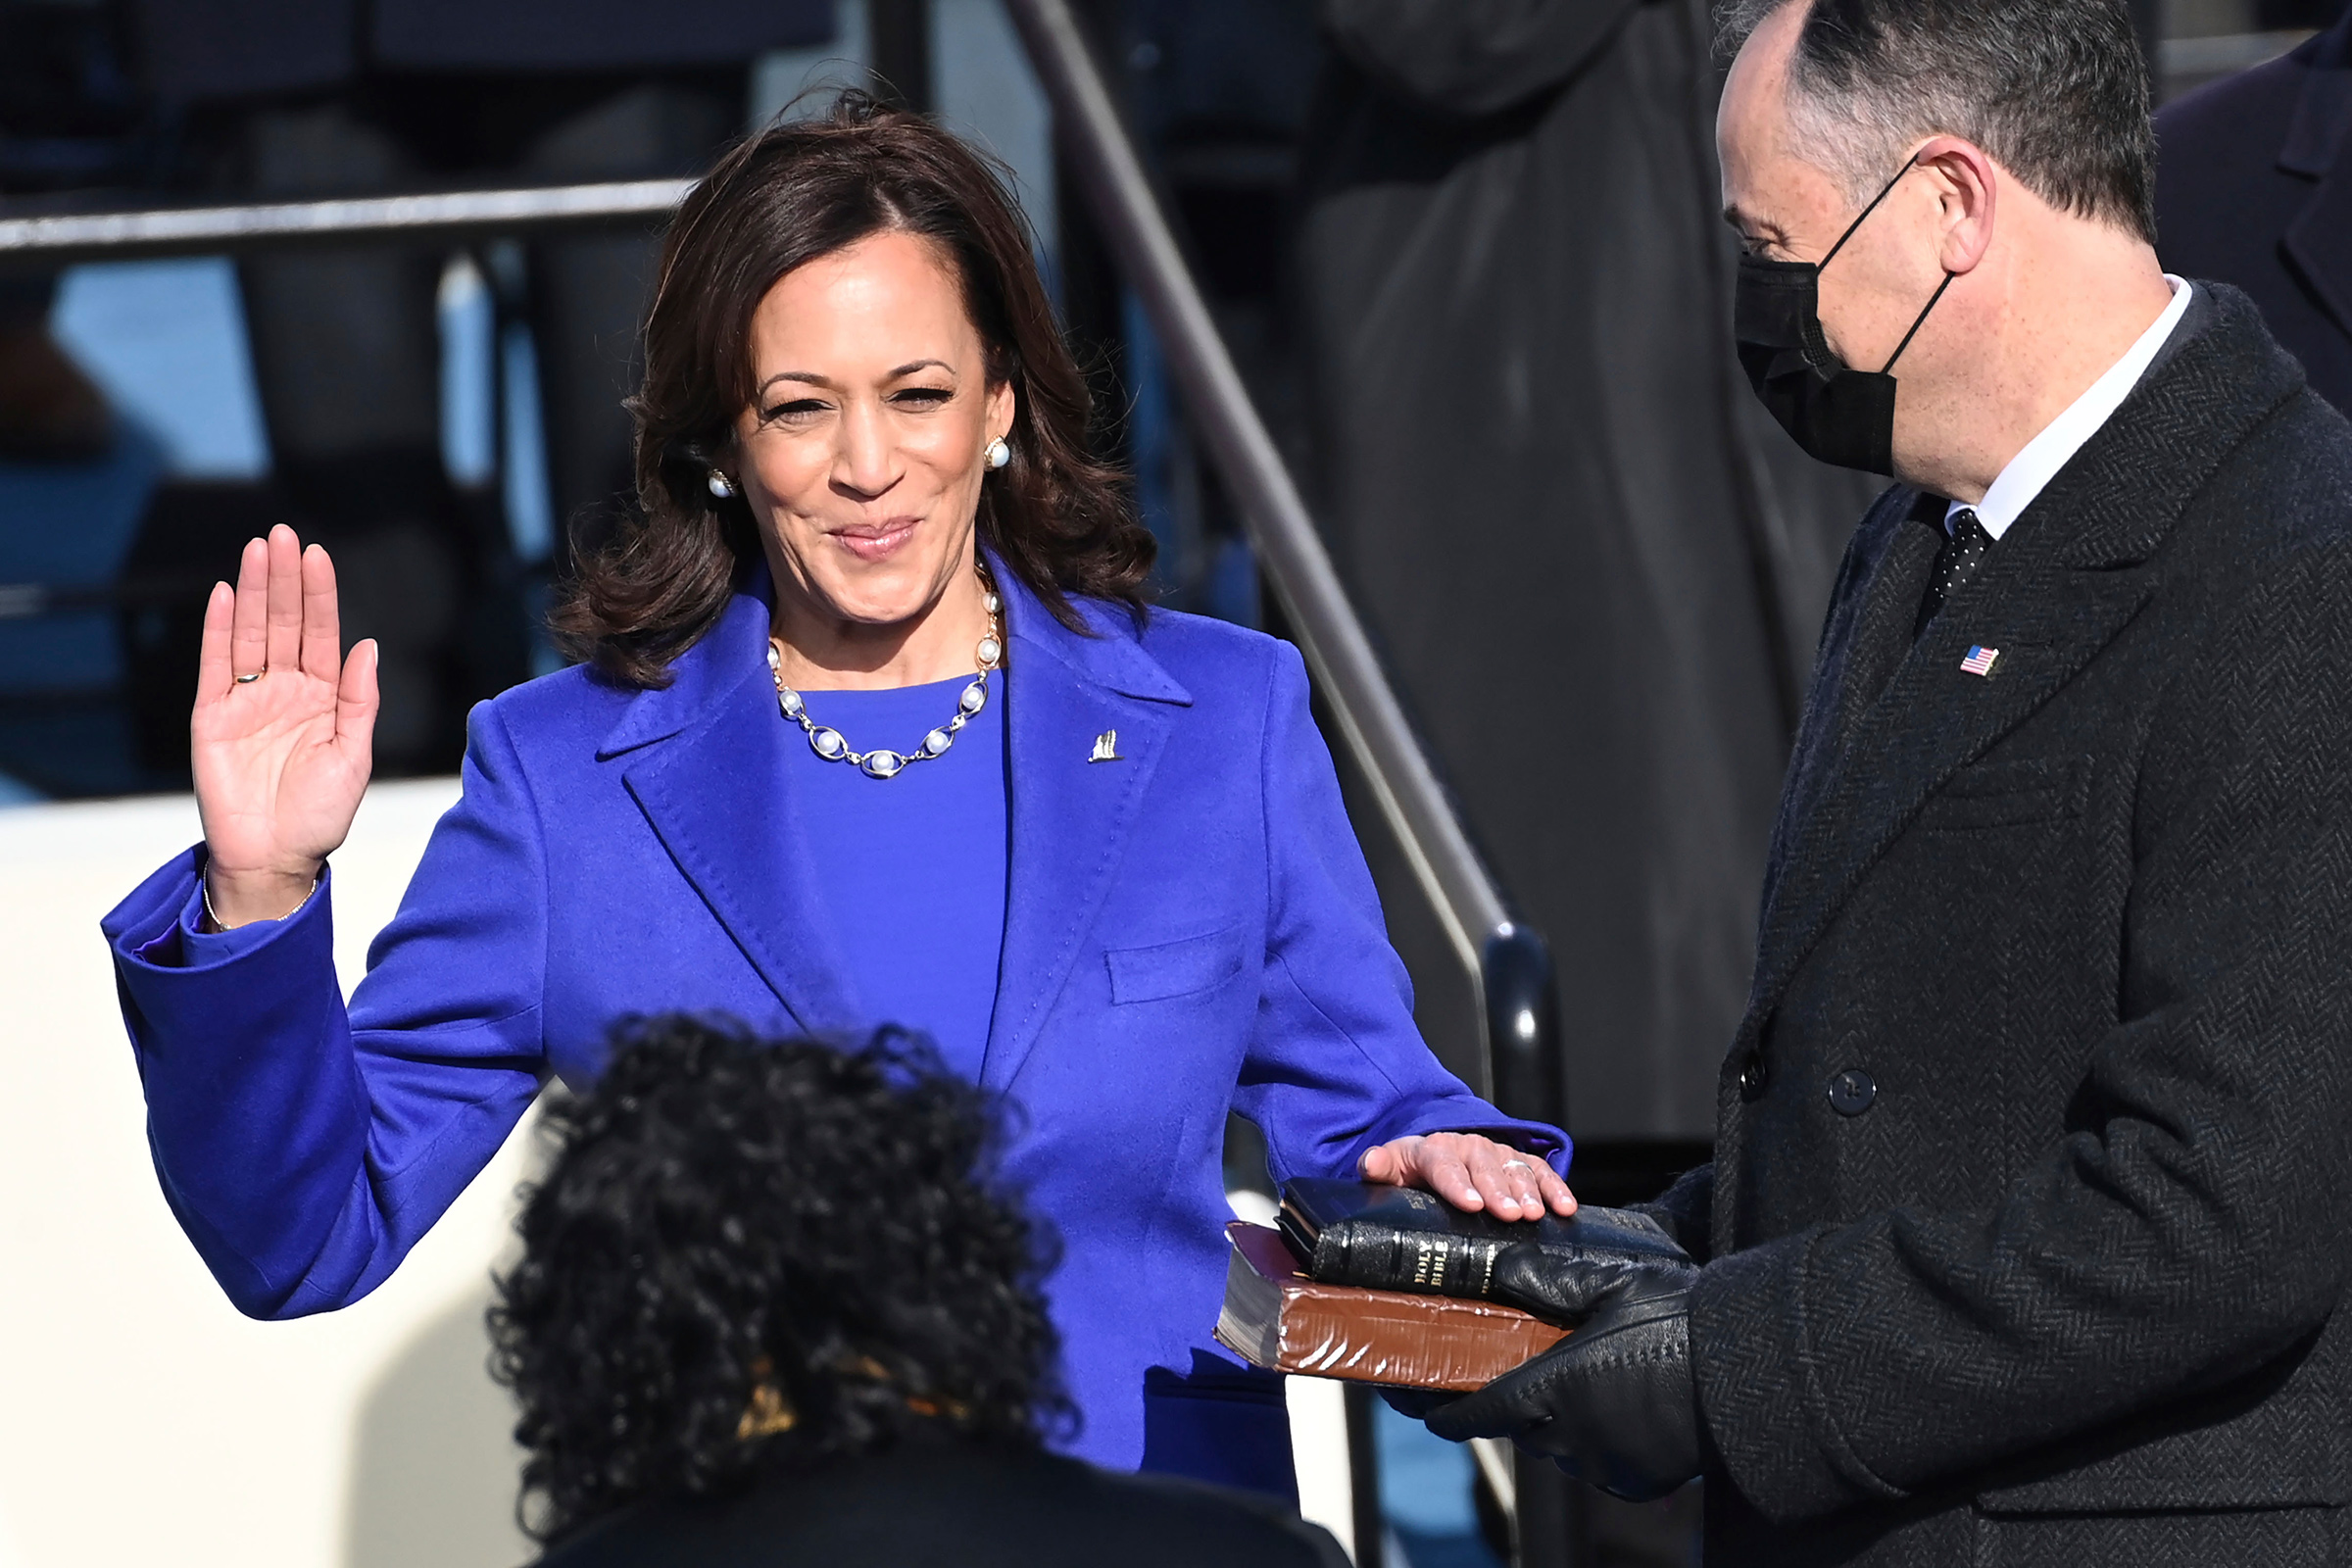 Kamala Harris is sworn in as vice president by Supreme Court Justice Sonia Sotomayor as her husband Doug Emhoff holds the Bible. (Saul Loeb—Pool/AP)